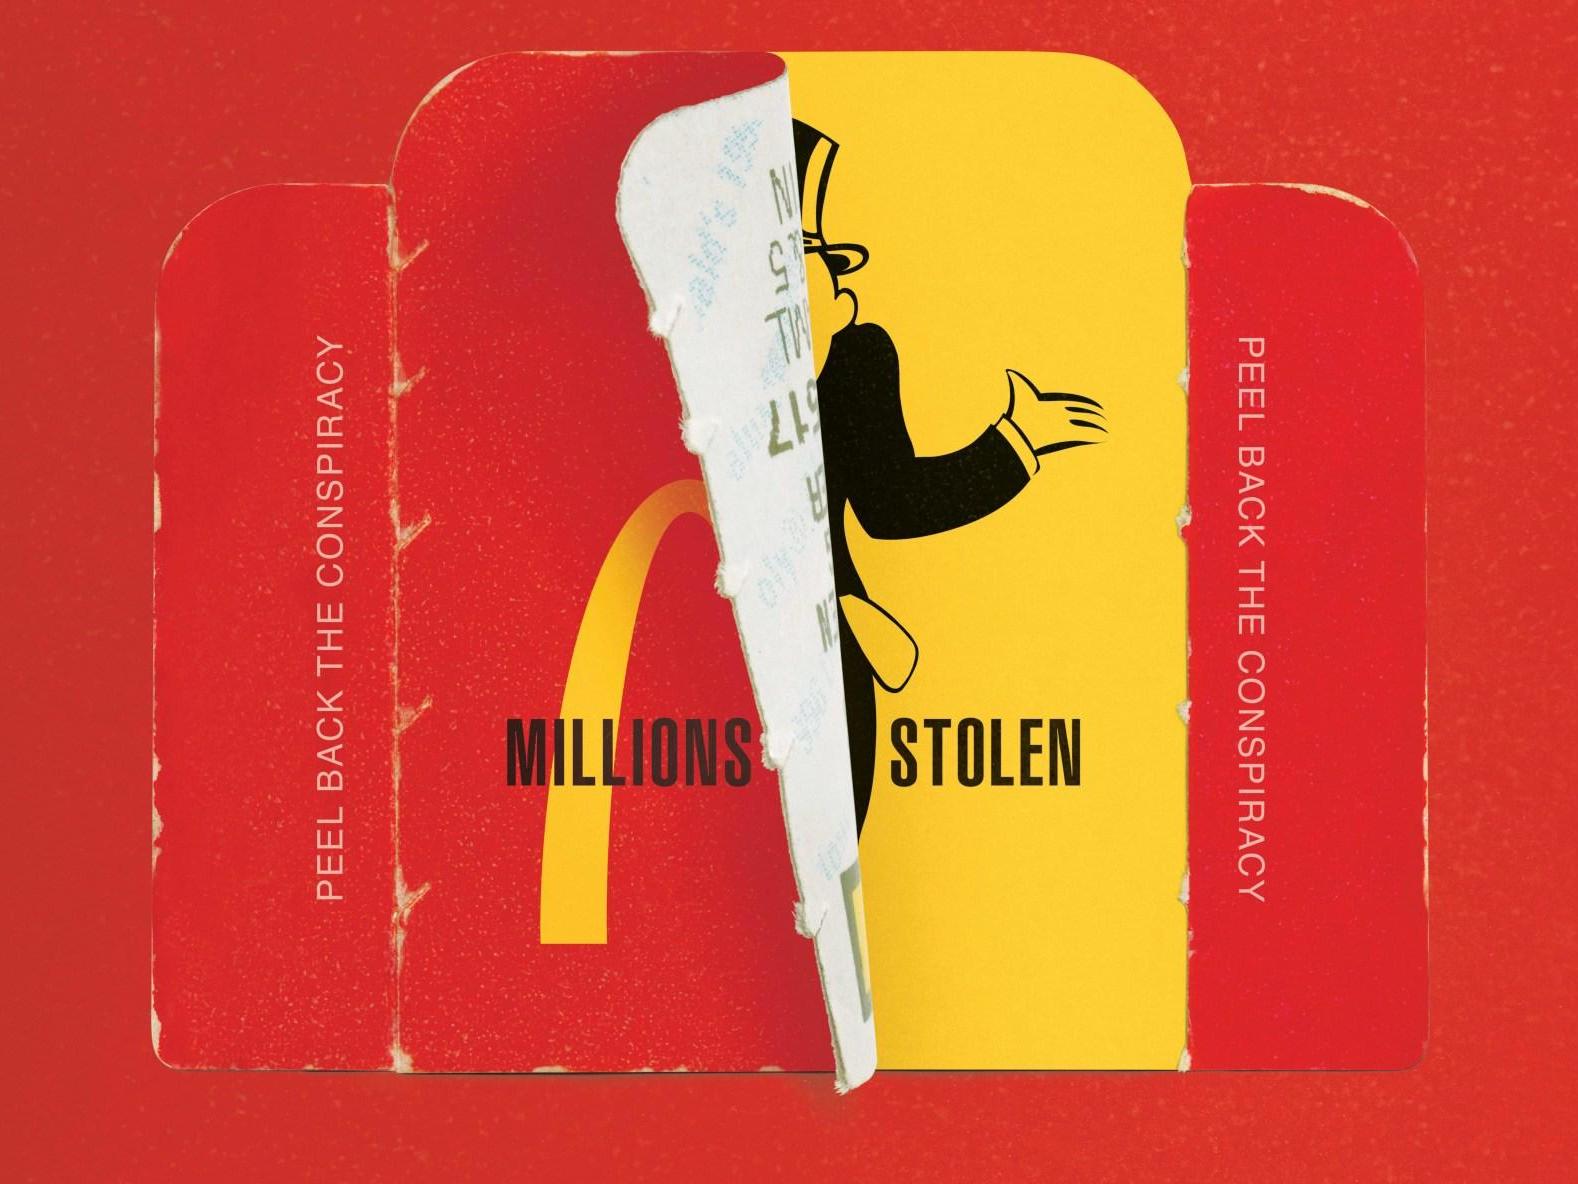 James Lee Hernandez and Brian Lazarte wrote and directed ‘McMillions’, about the criminal ring that defrauded McDonald’s throughout the Nineties